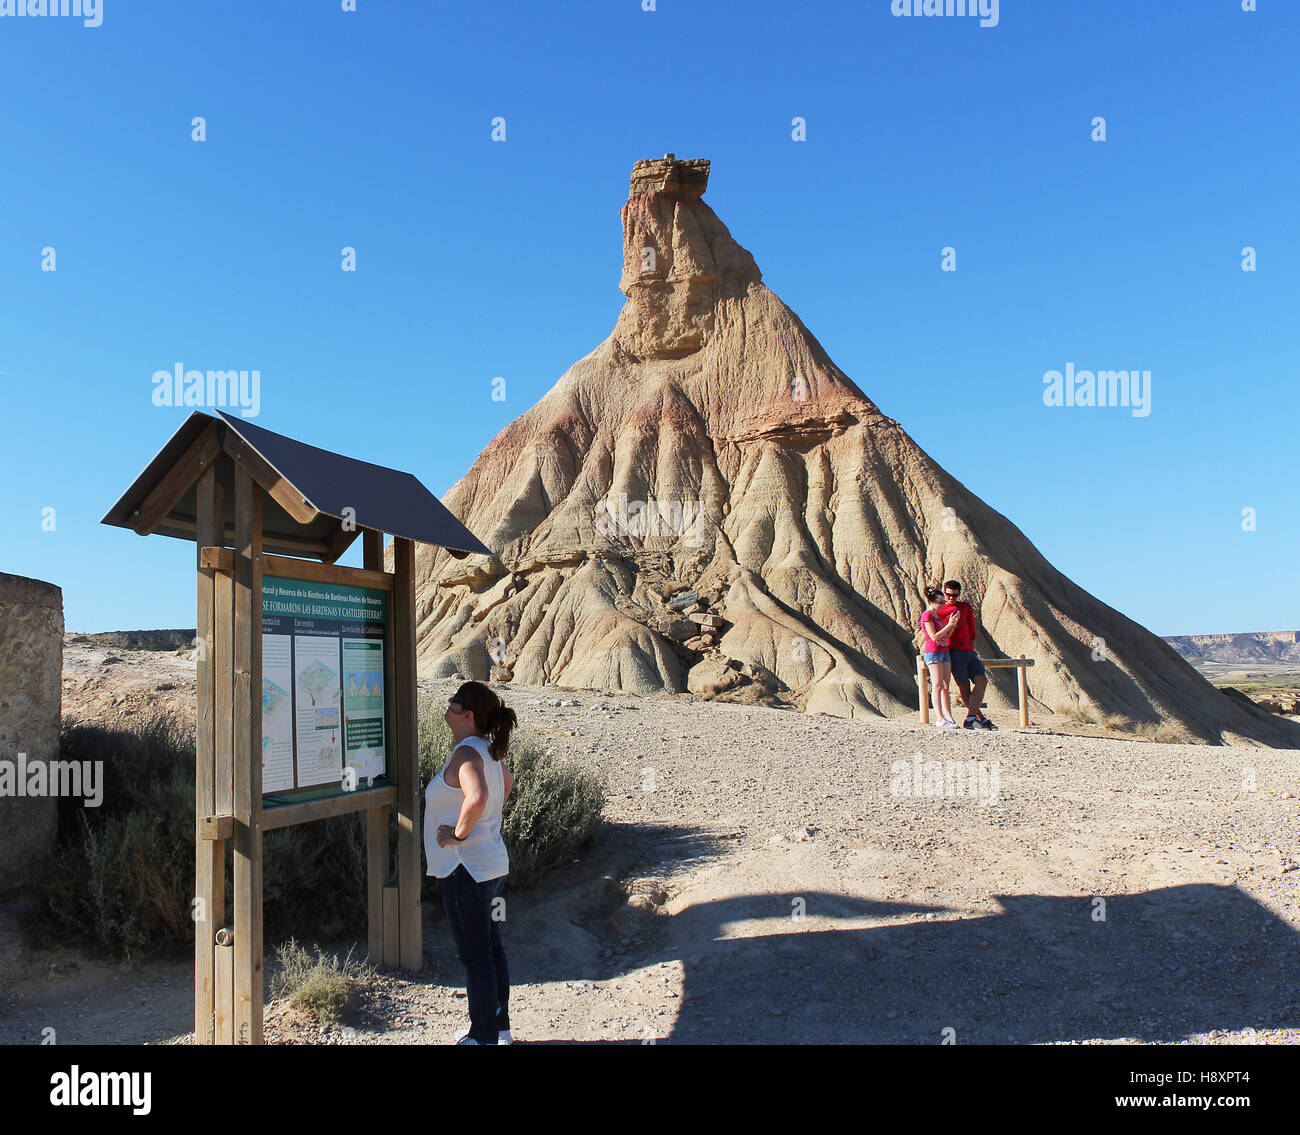 BARDENAS REALES, NAVARRE/SPAIN - AUGUST 16, 2014: Tourists at the Castildetierra landmark at the Bardenas Reales Natural Park. Stock Photo